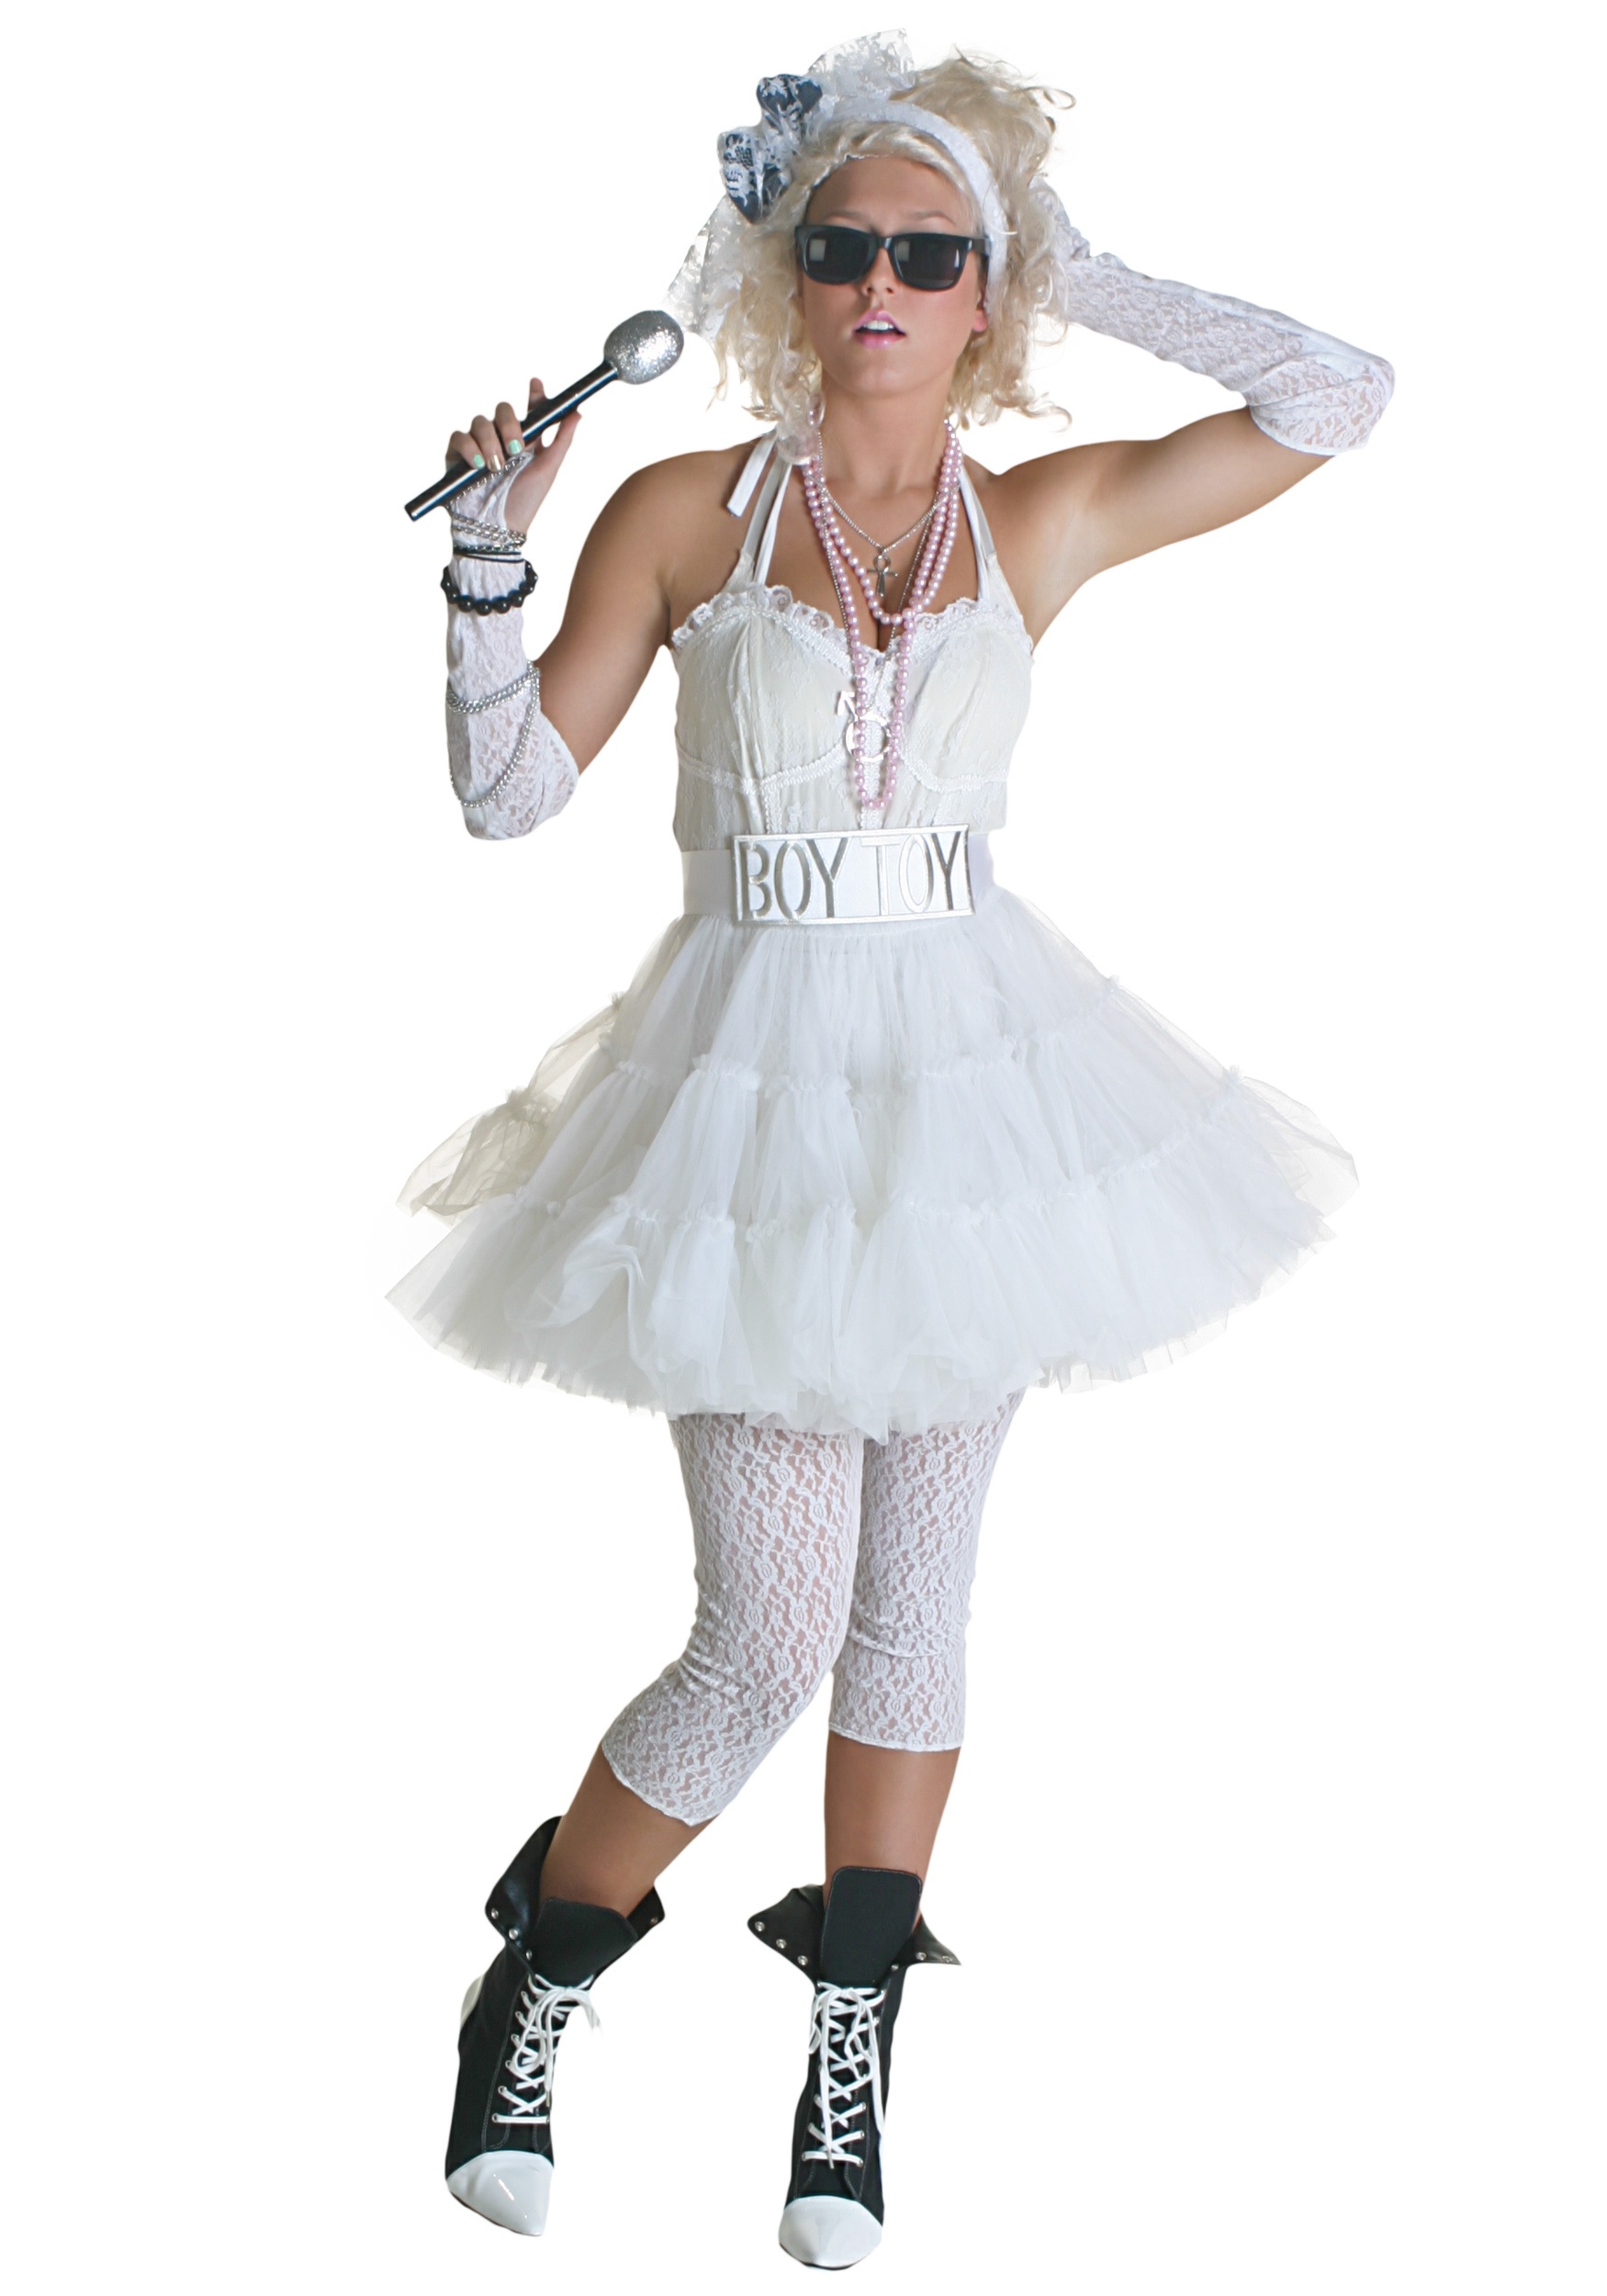 Boy Toy Madonna Costume Material Girl Costumes